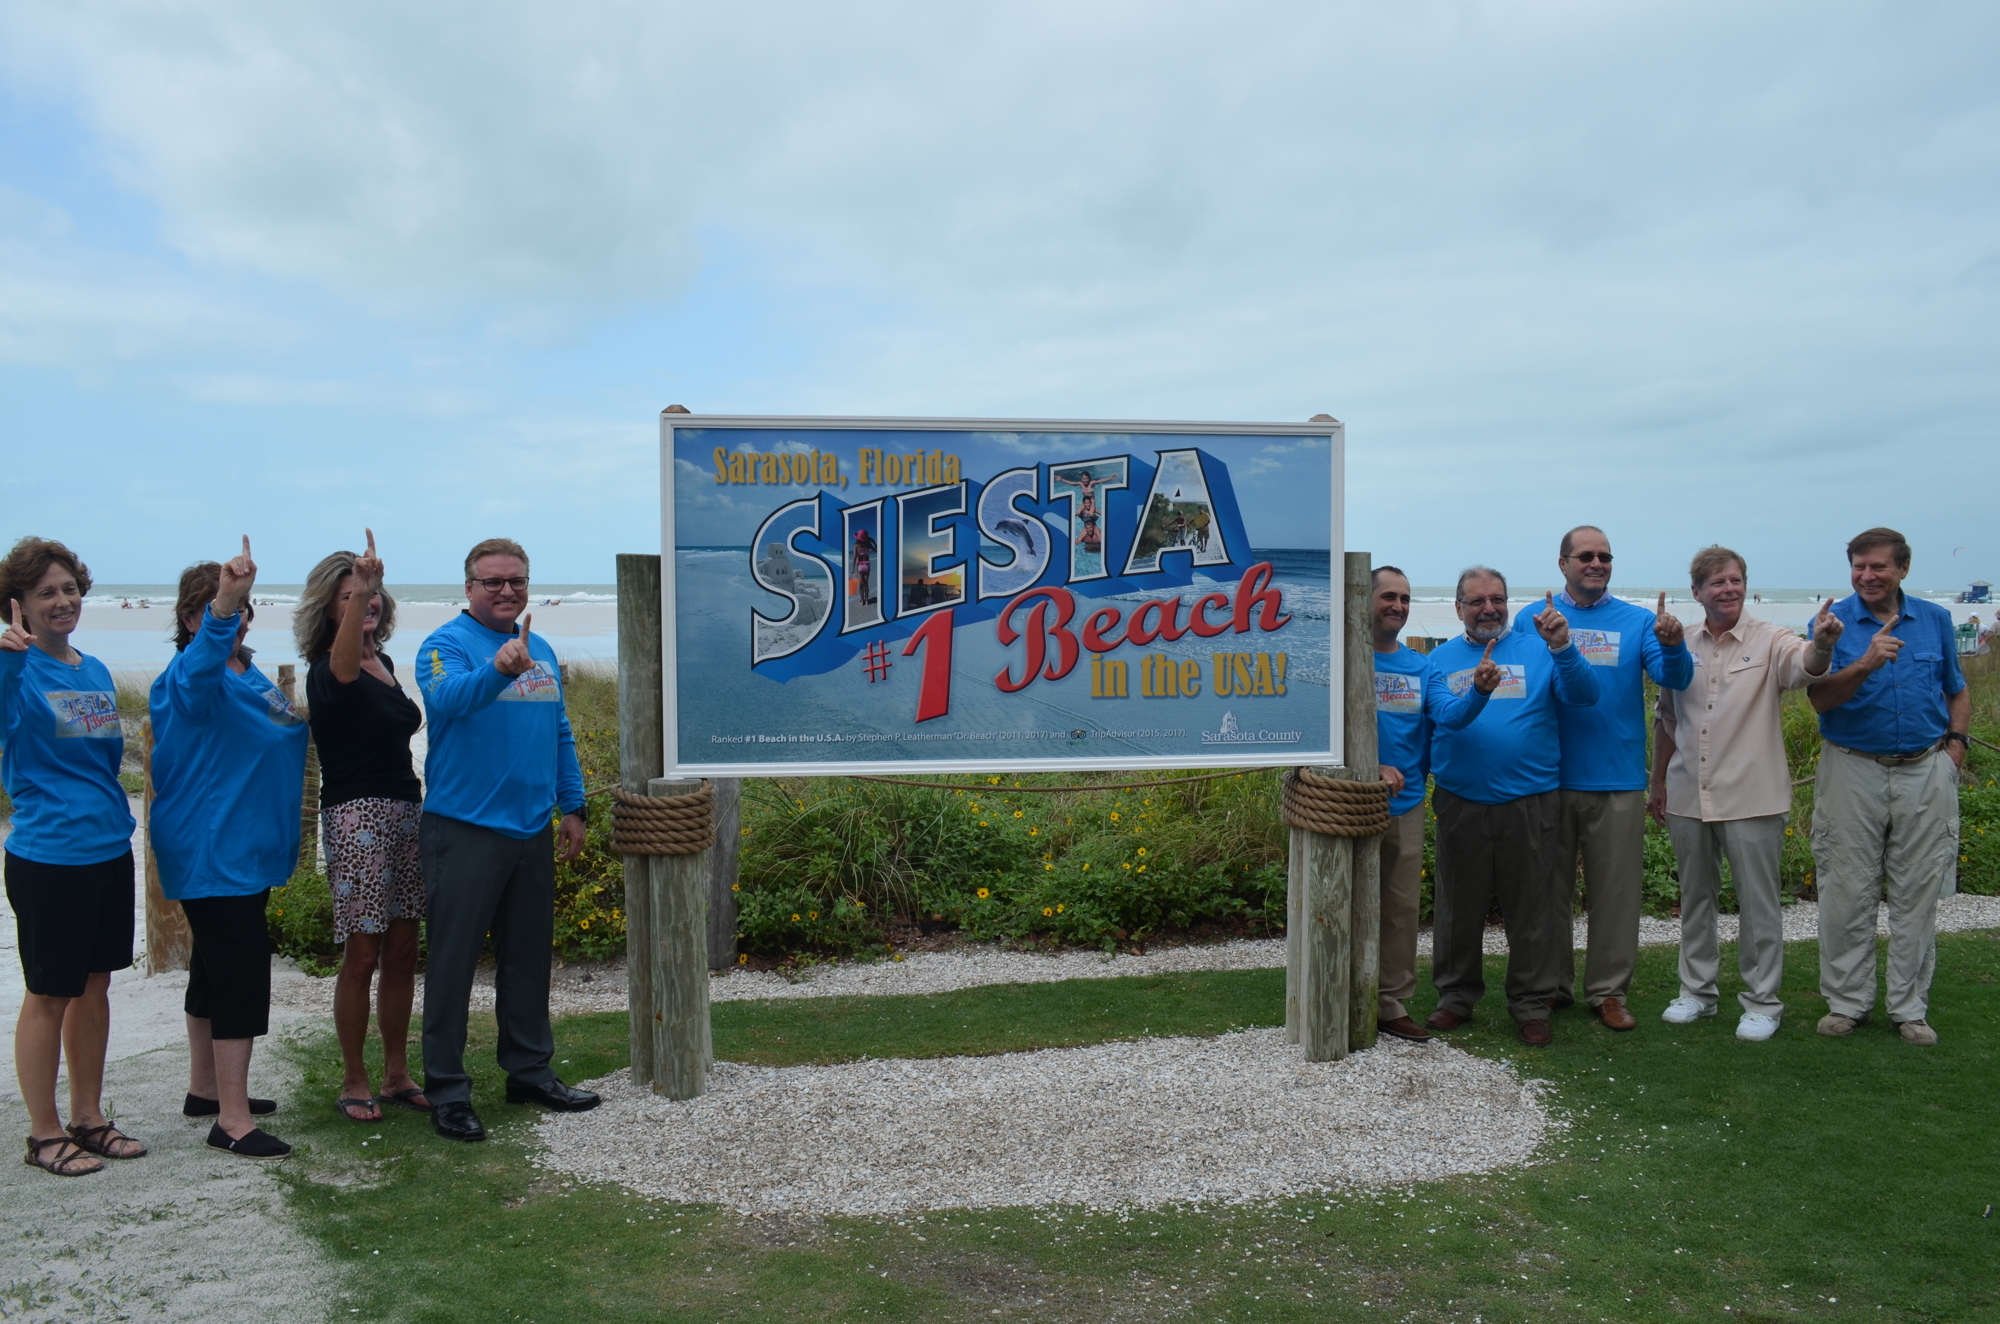 County officials, alongside Stephen Leatherman, unveiled a new sign at Siesta Key Beach in May recognizing the beach's latest honor.